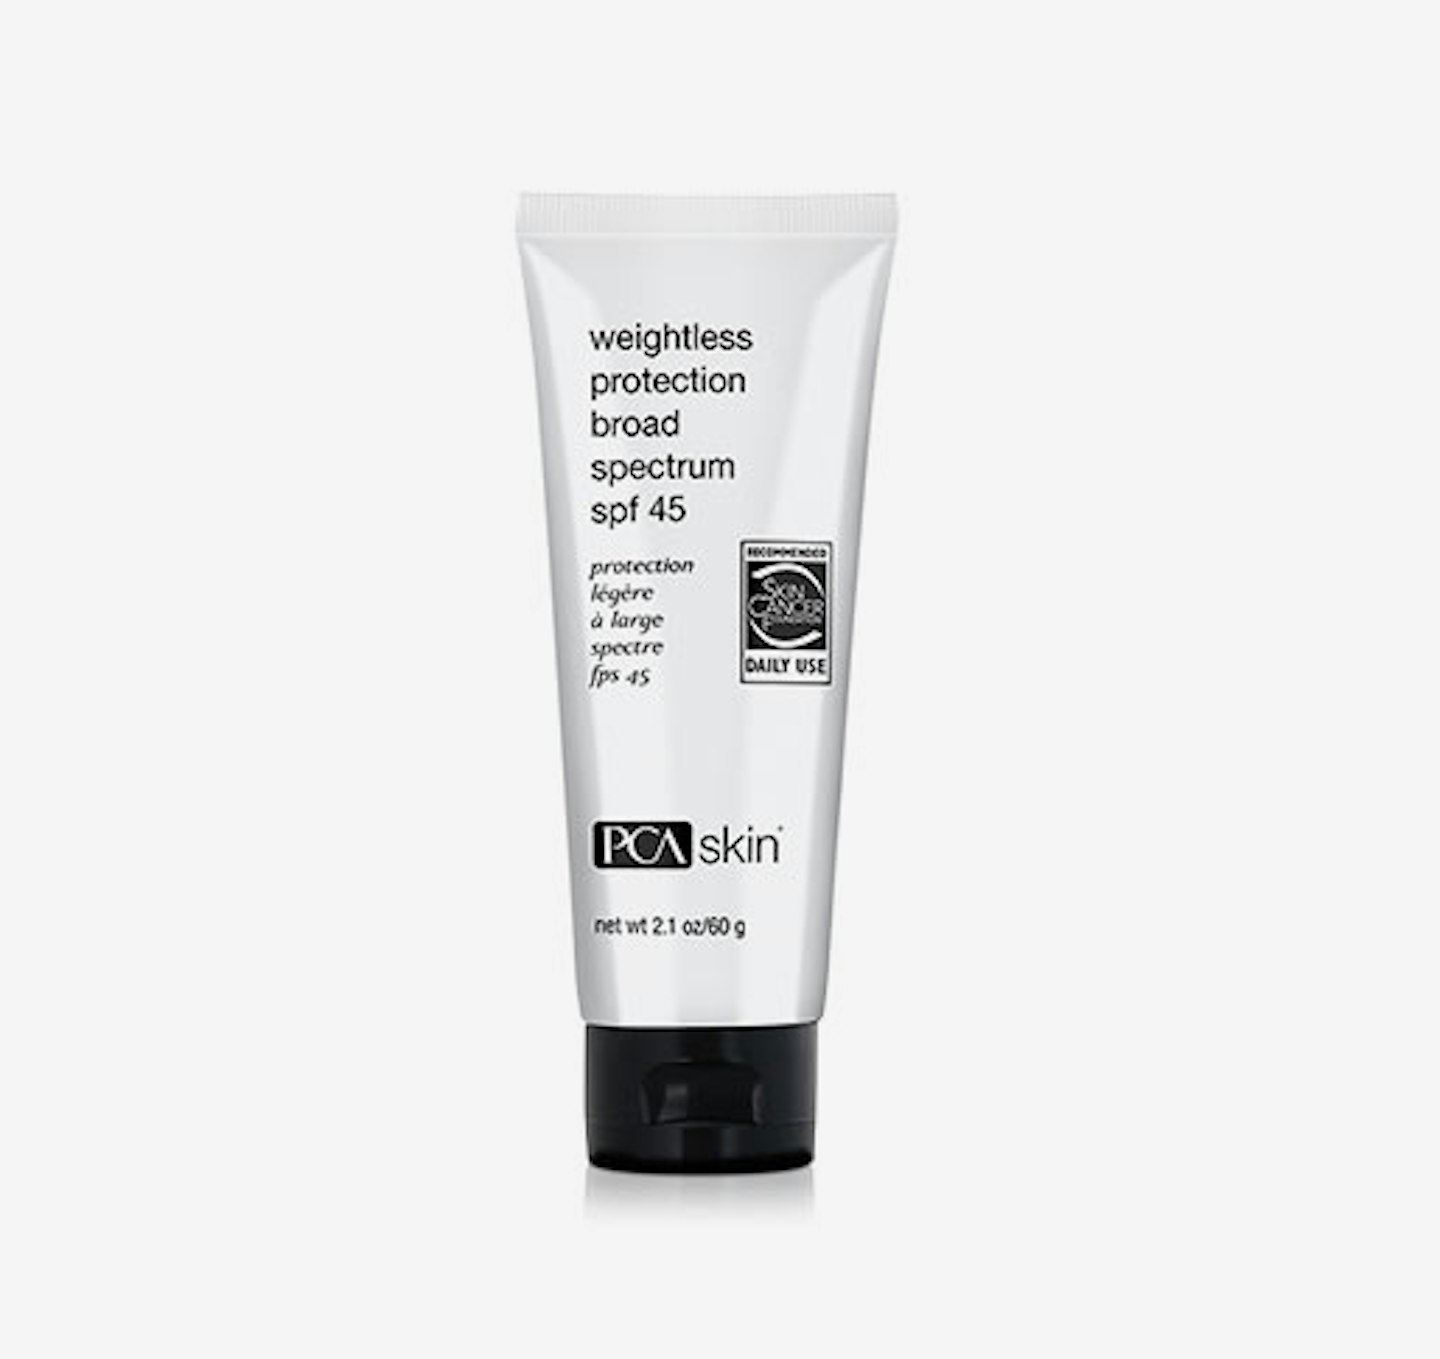 PCA Skin Weightless Protection Broad Spectrum SPF45, £40